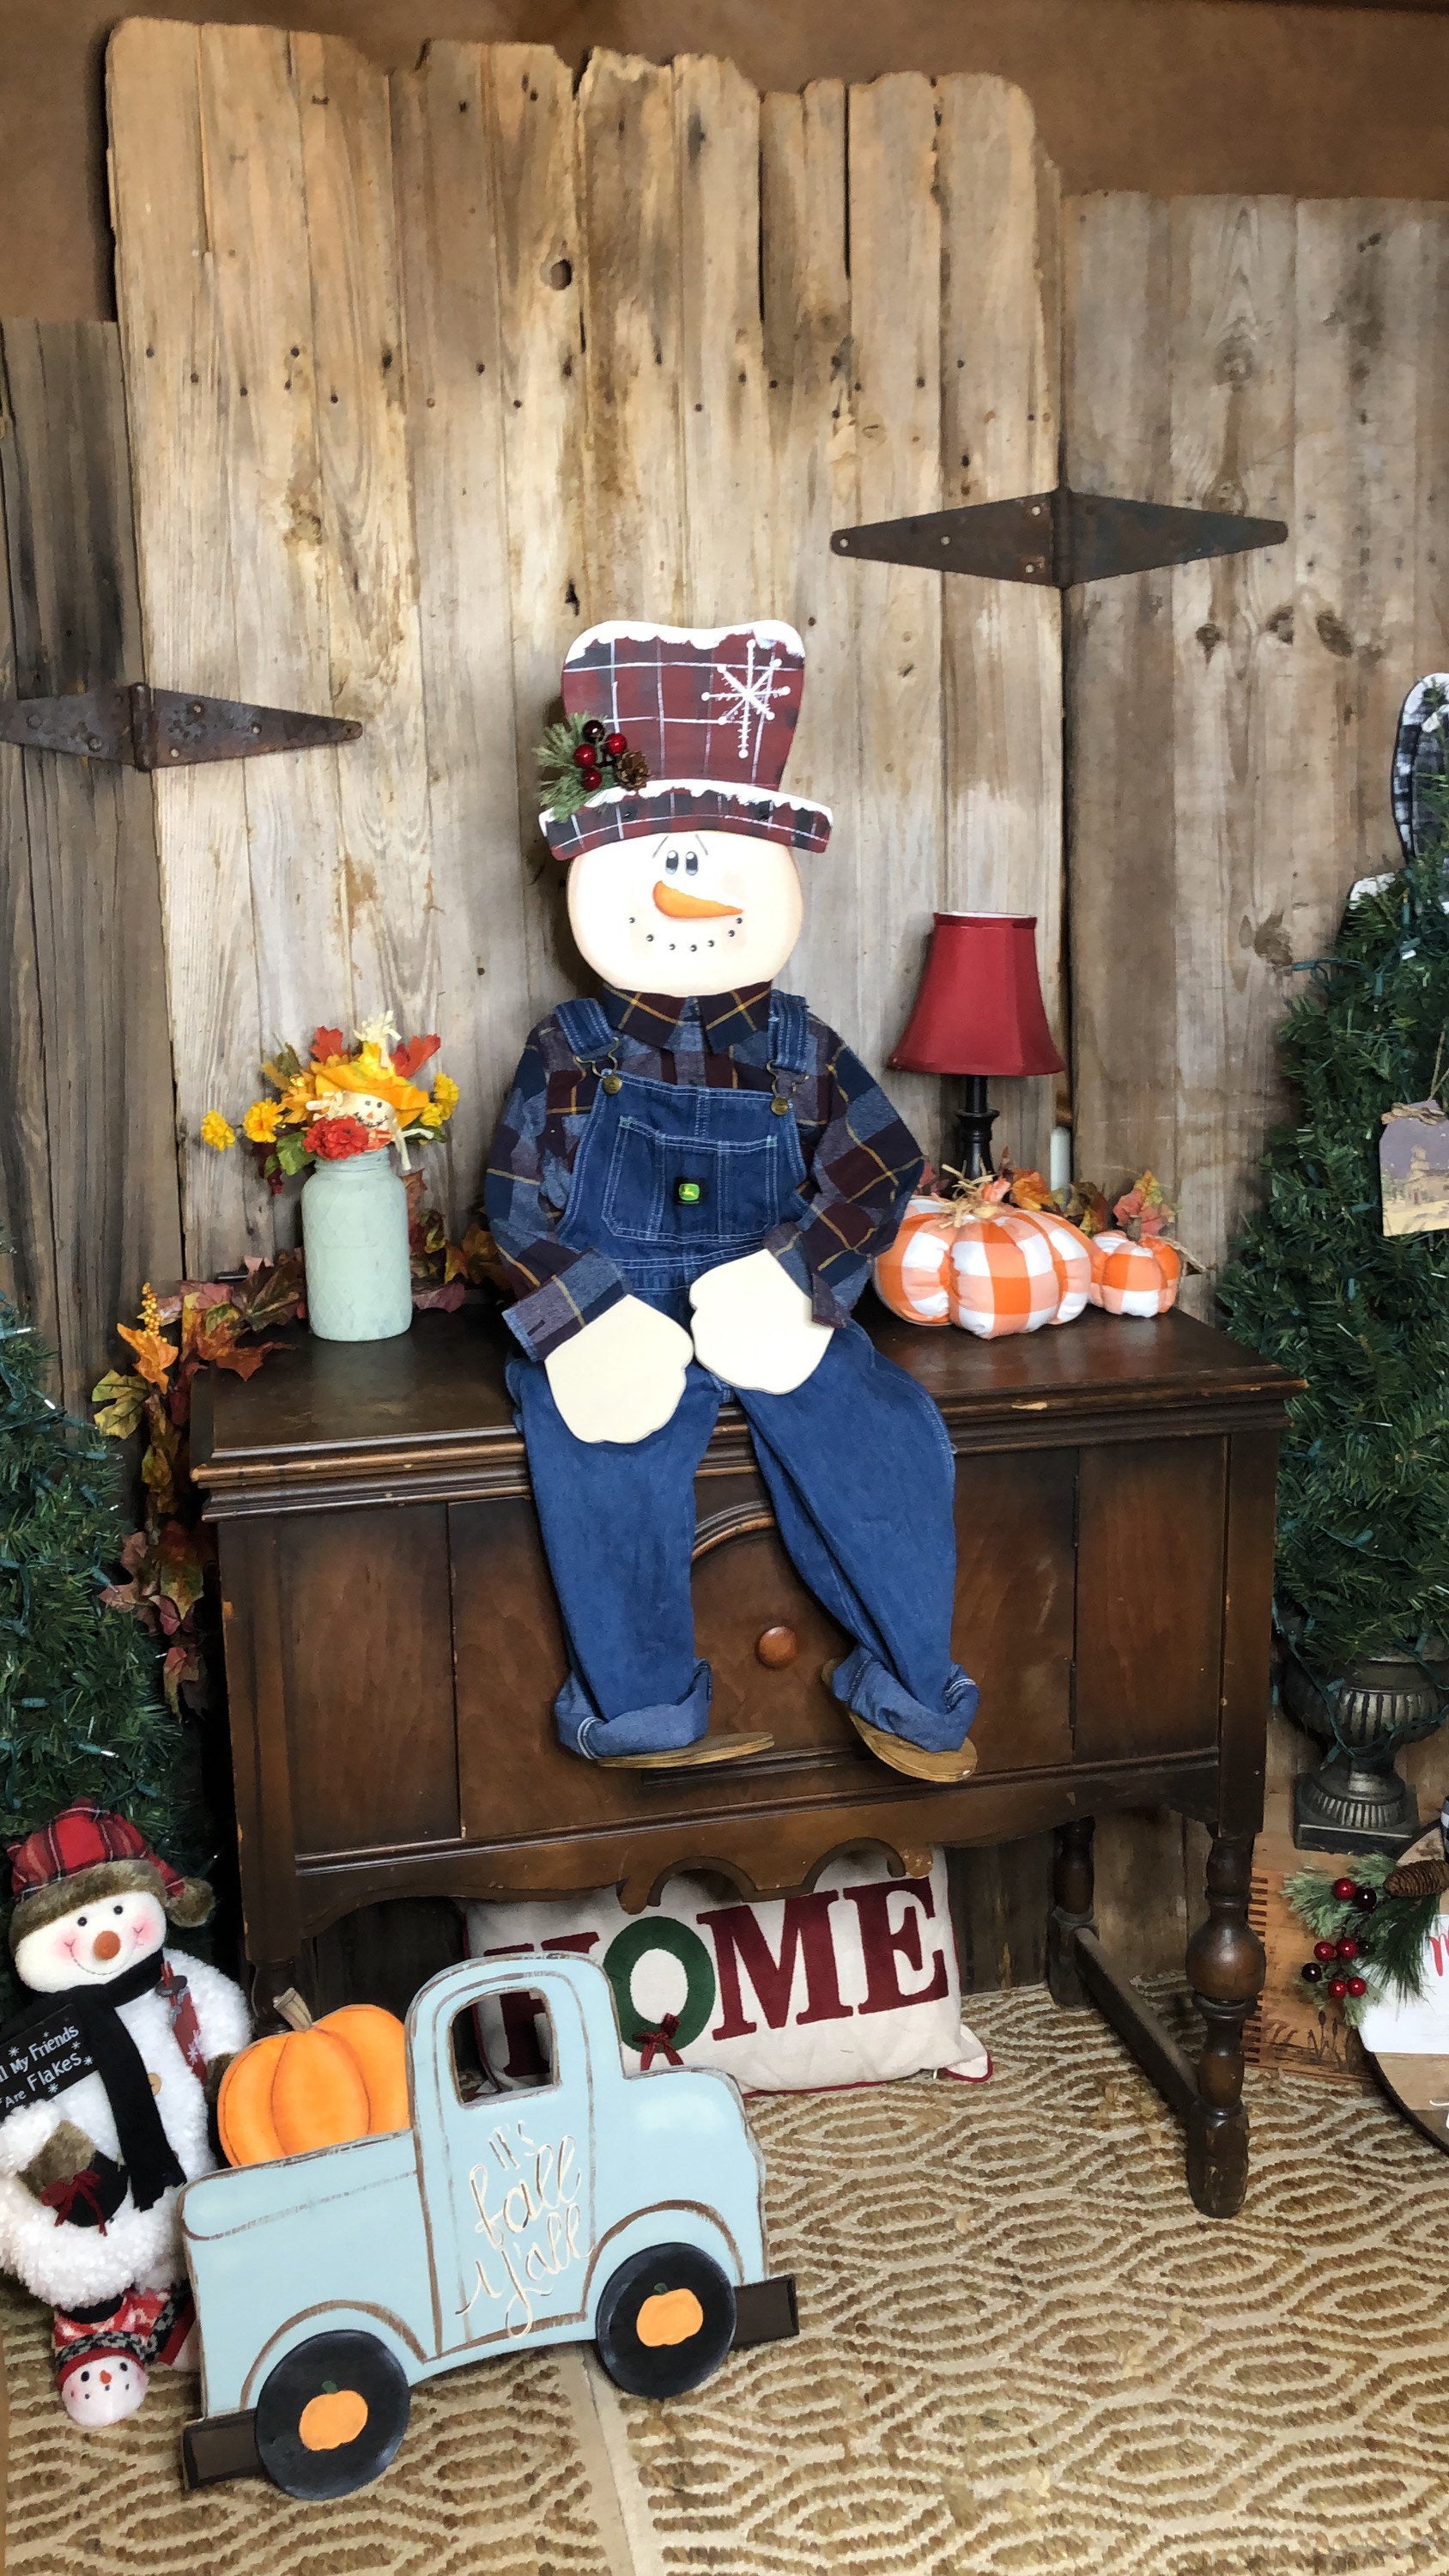 Dressed Sitting Snowman Wooden Winter Porch Sitter Home Decor Decorating  Outdoor Christmas Porch Decor Christmas Winter Decor 